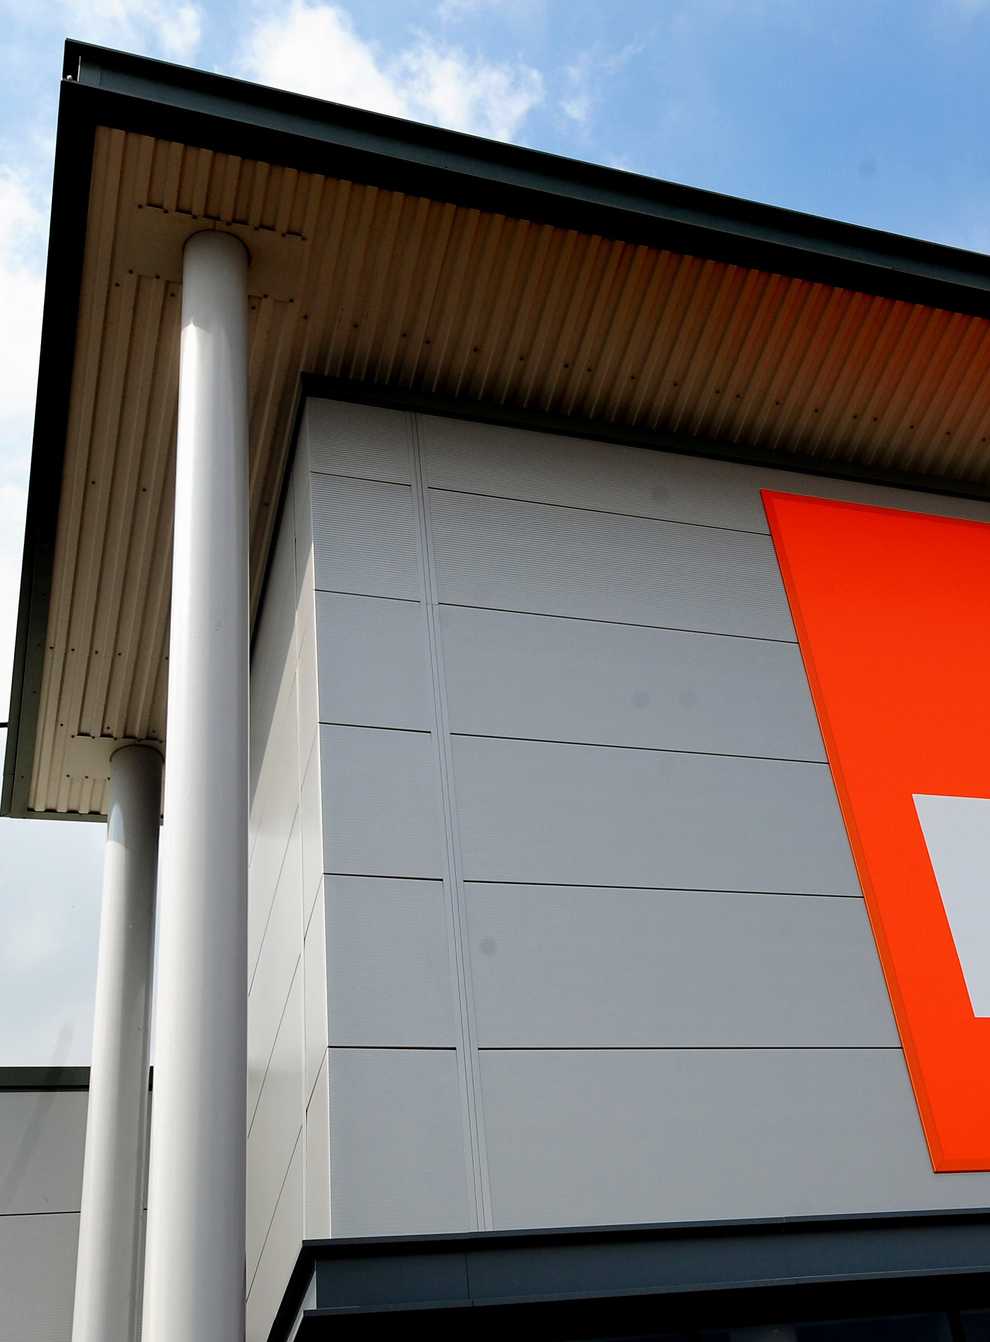 B&Q owner Kingfisher has revealed higher sales as it benefited from customers seeking to improve energy efficiency at home (Rui Vieira/PA)